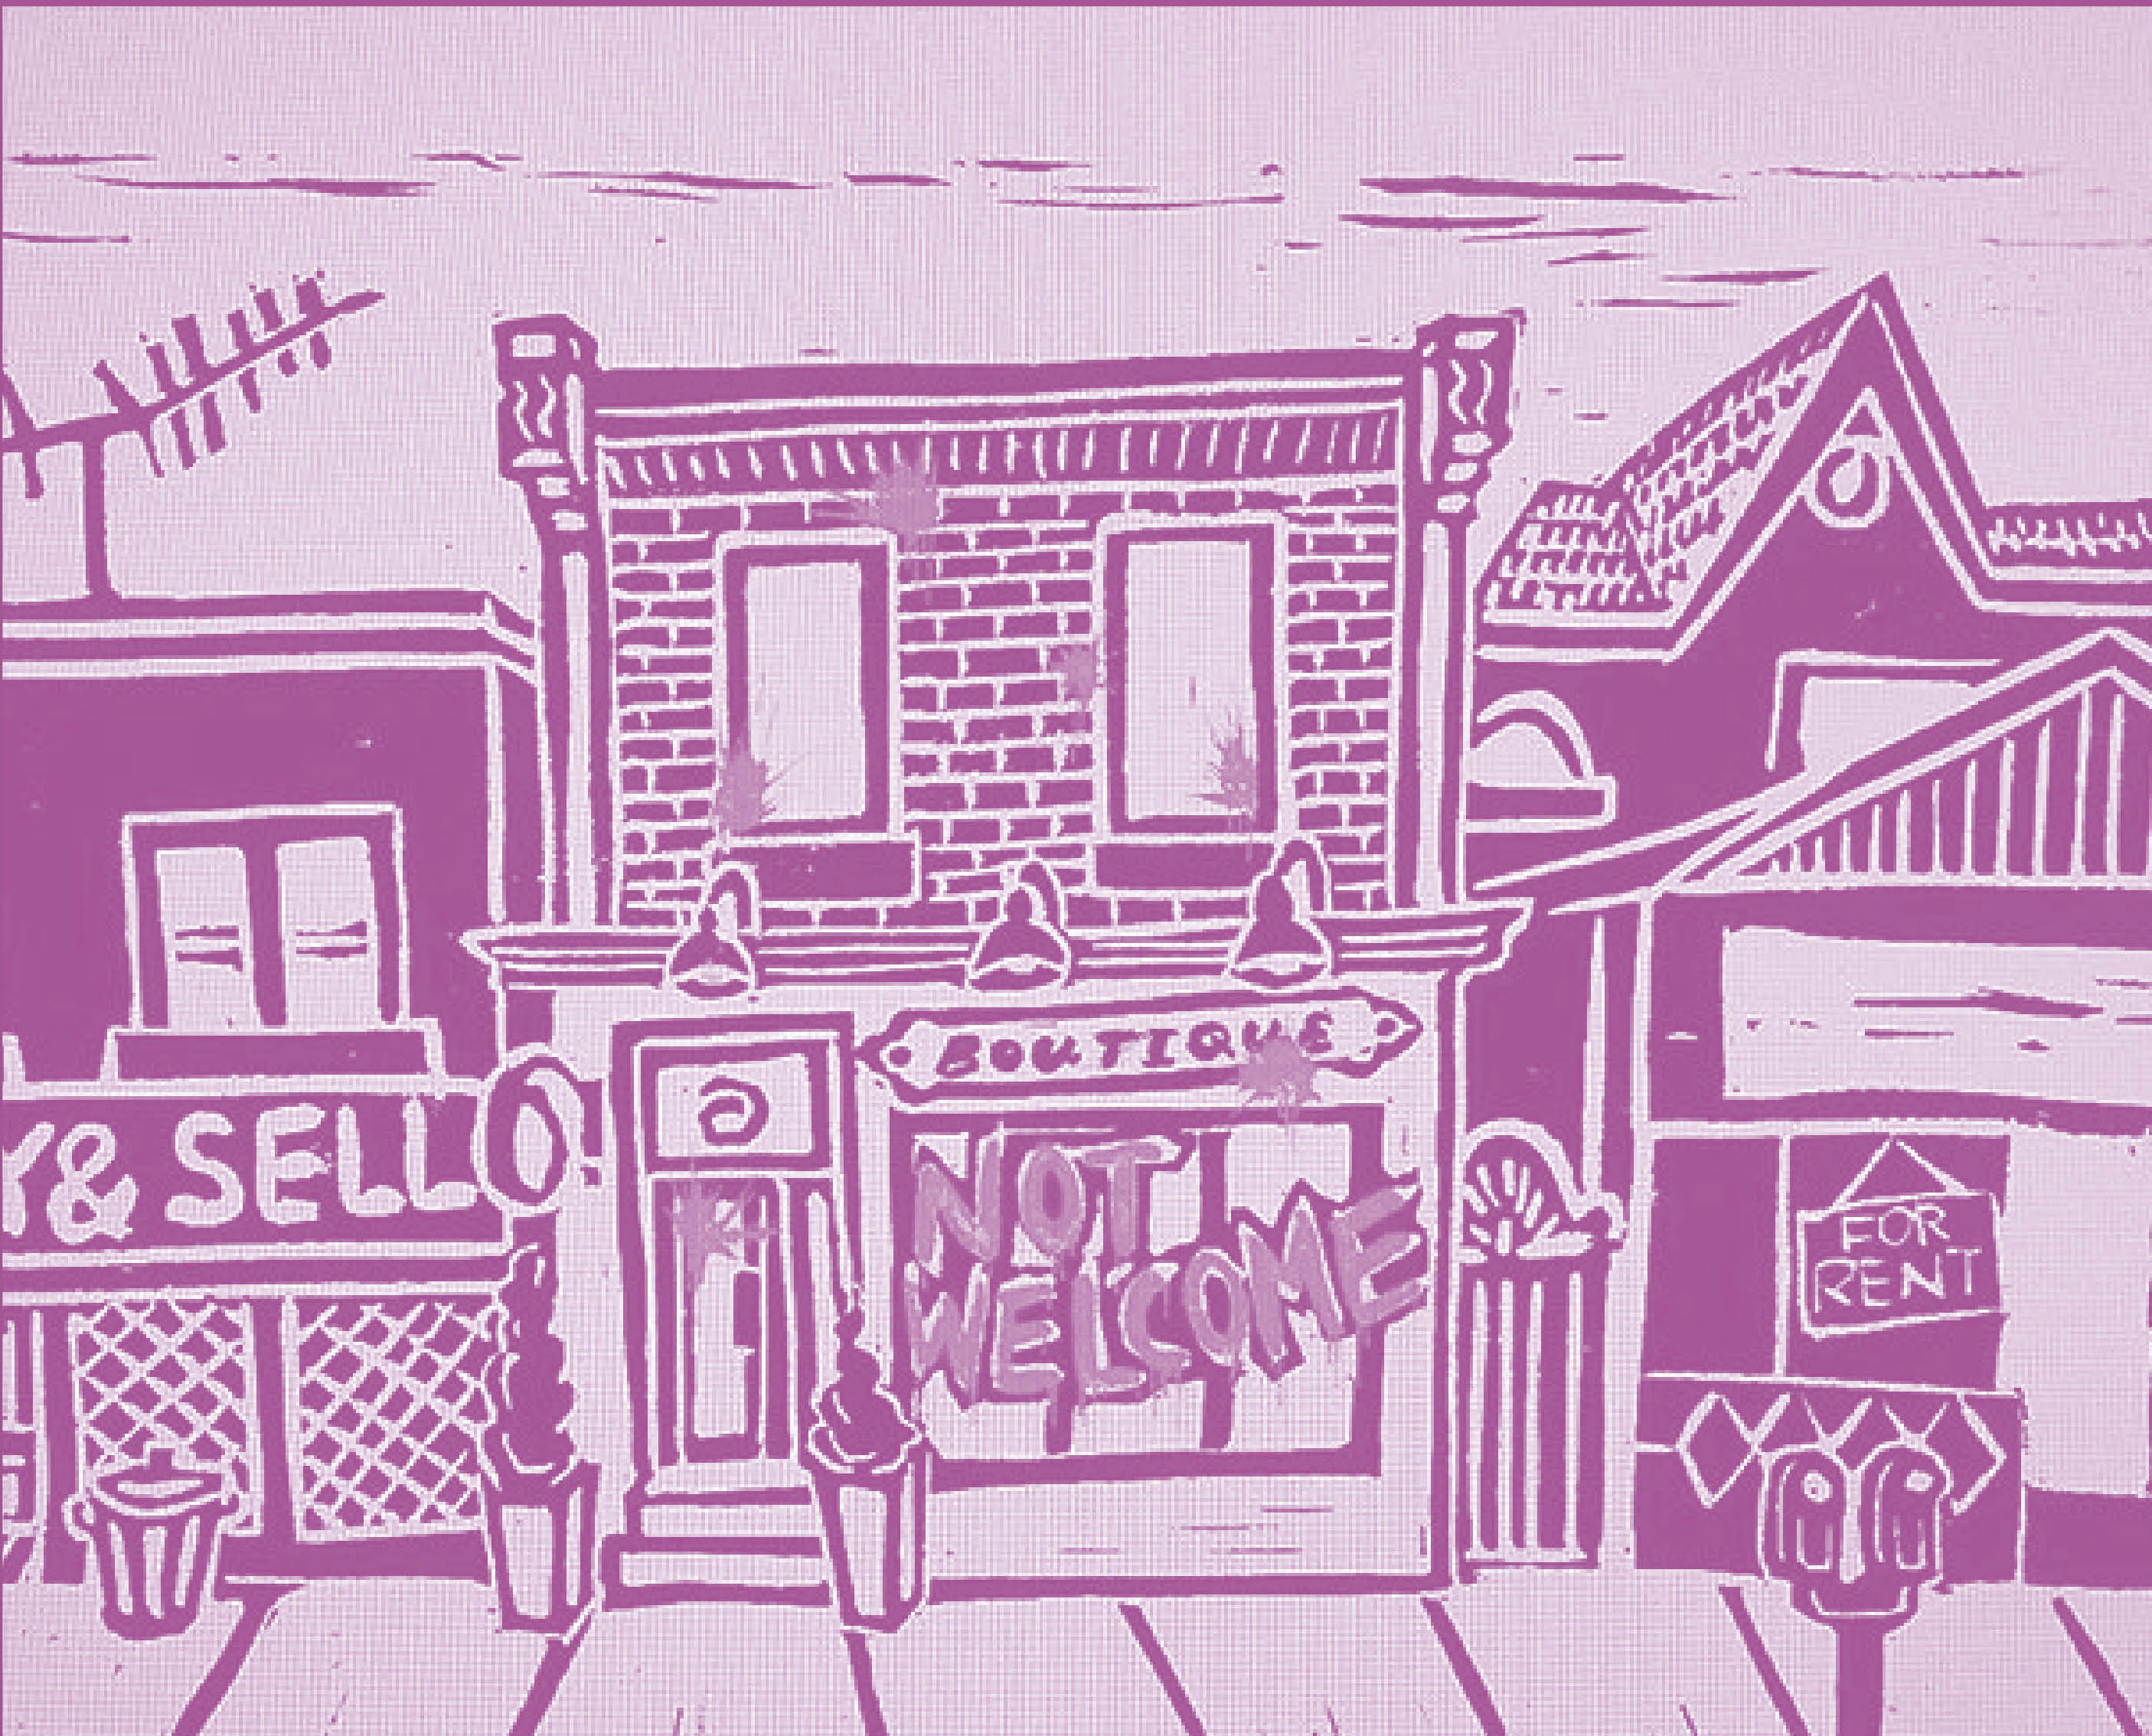 Finding ways to resist: learning from anti-gentrification actions in Montreal